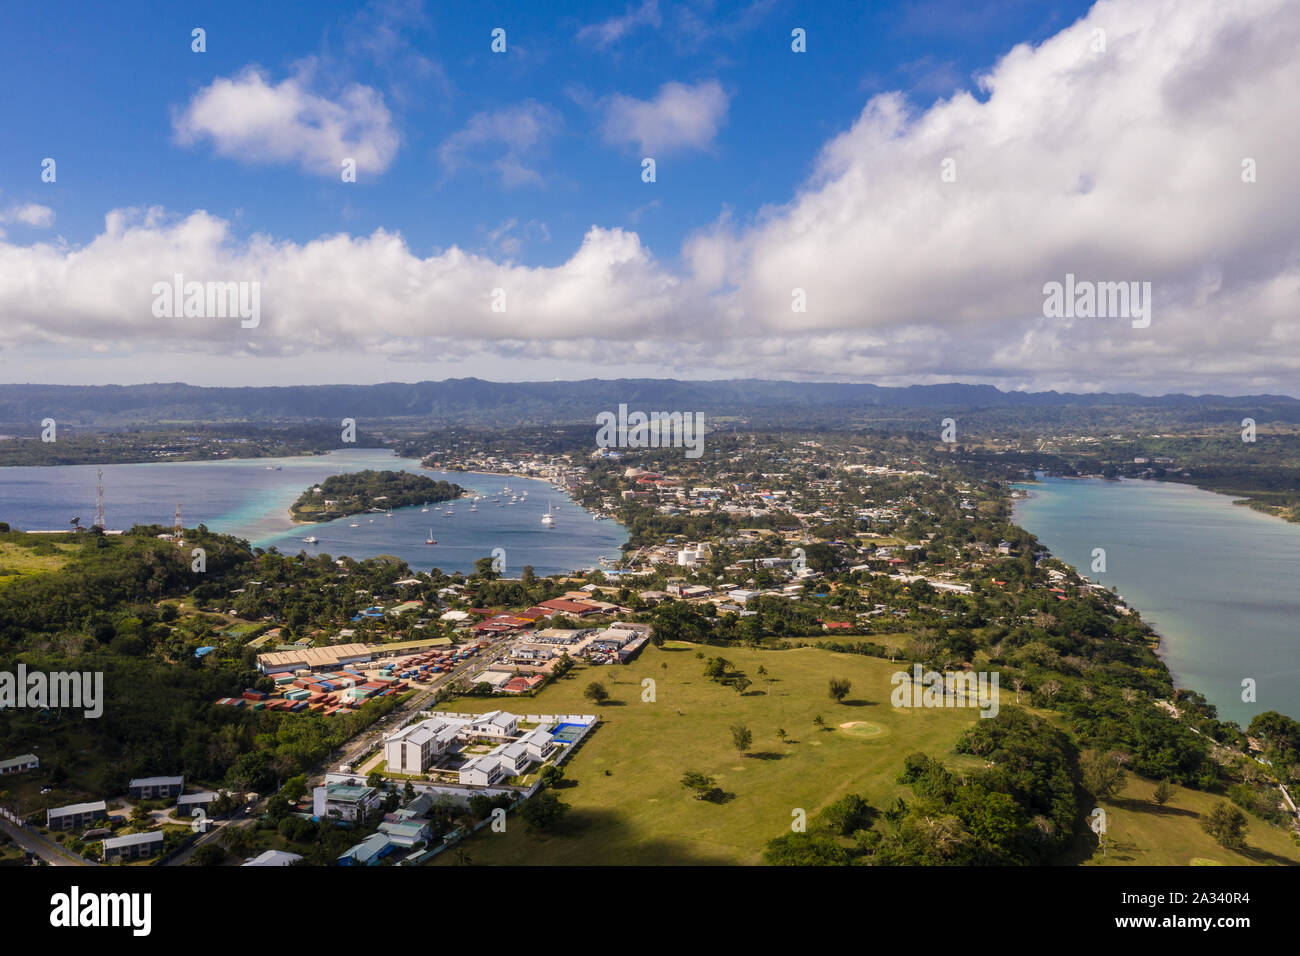 Aerial view of the Port Vila city and bay with the Iririki resort island in Vanuatu capital city in the Pacific. Stock Photo